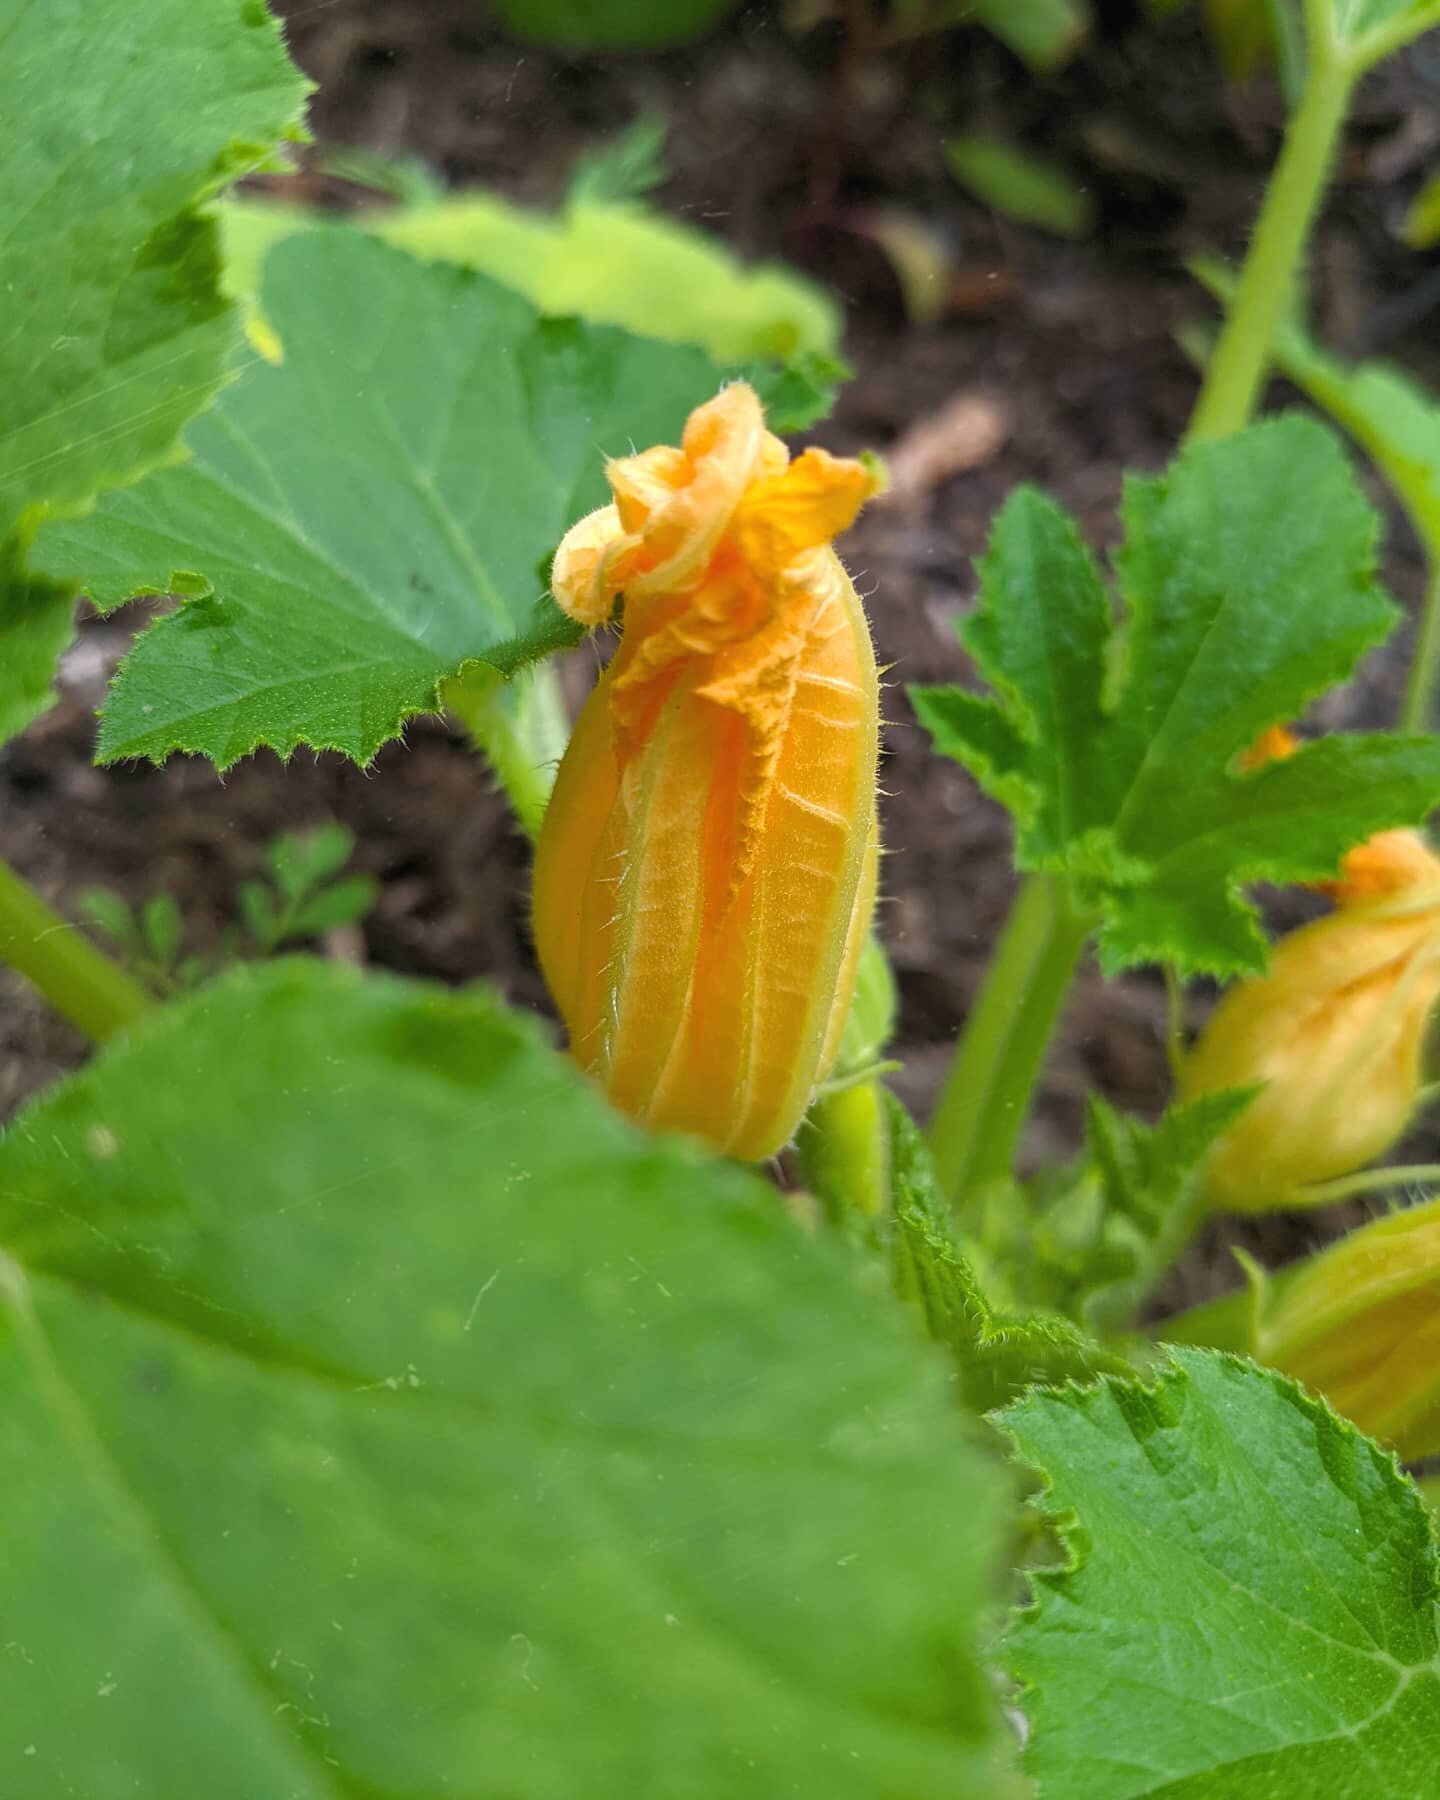 This gorgeous and irrelevant squash blossom grown by Frankie is here to say: Wow holy shit y'all. I meant to post a &quot;thank you for 5,000&quot; listens post but somehow with our latest lawns episode (now our most listened to episode by FAR) we BL